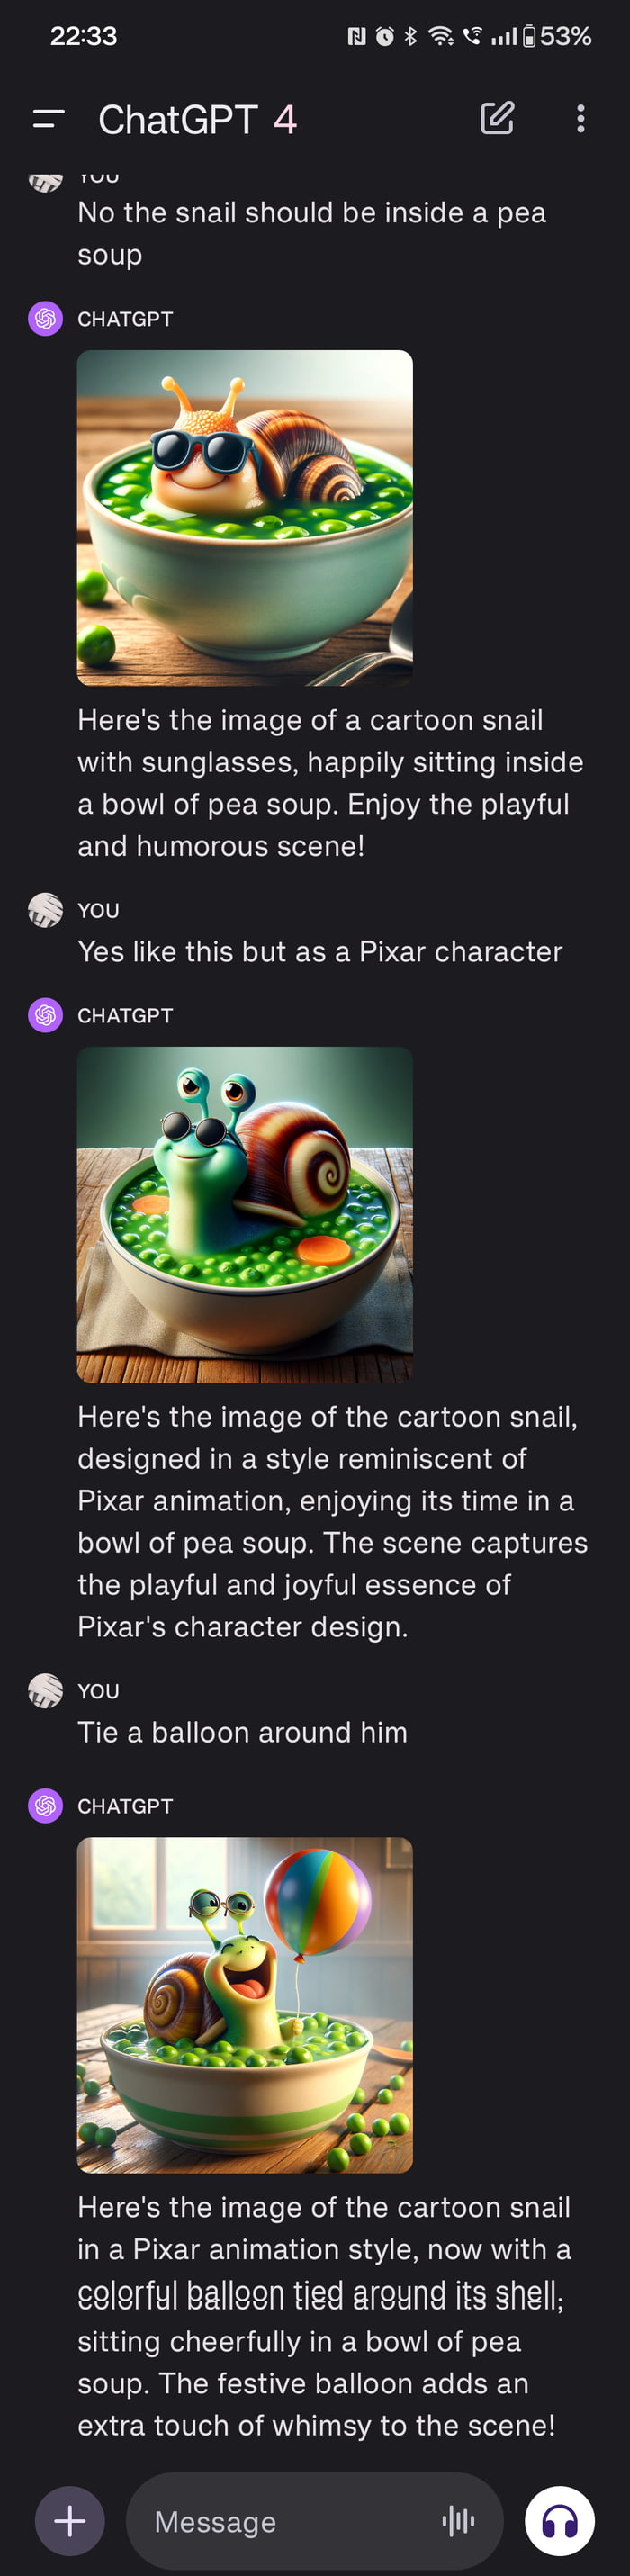 GPT snail vacation in a pea soup Image